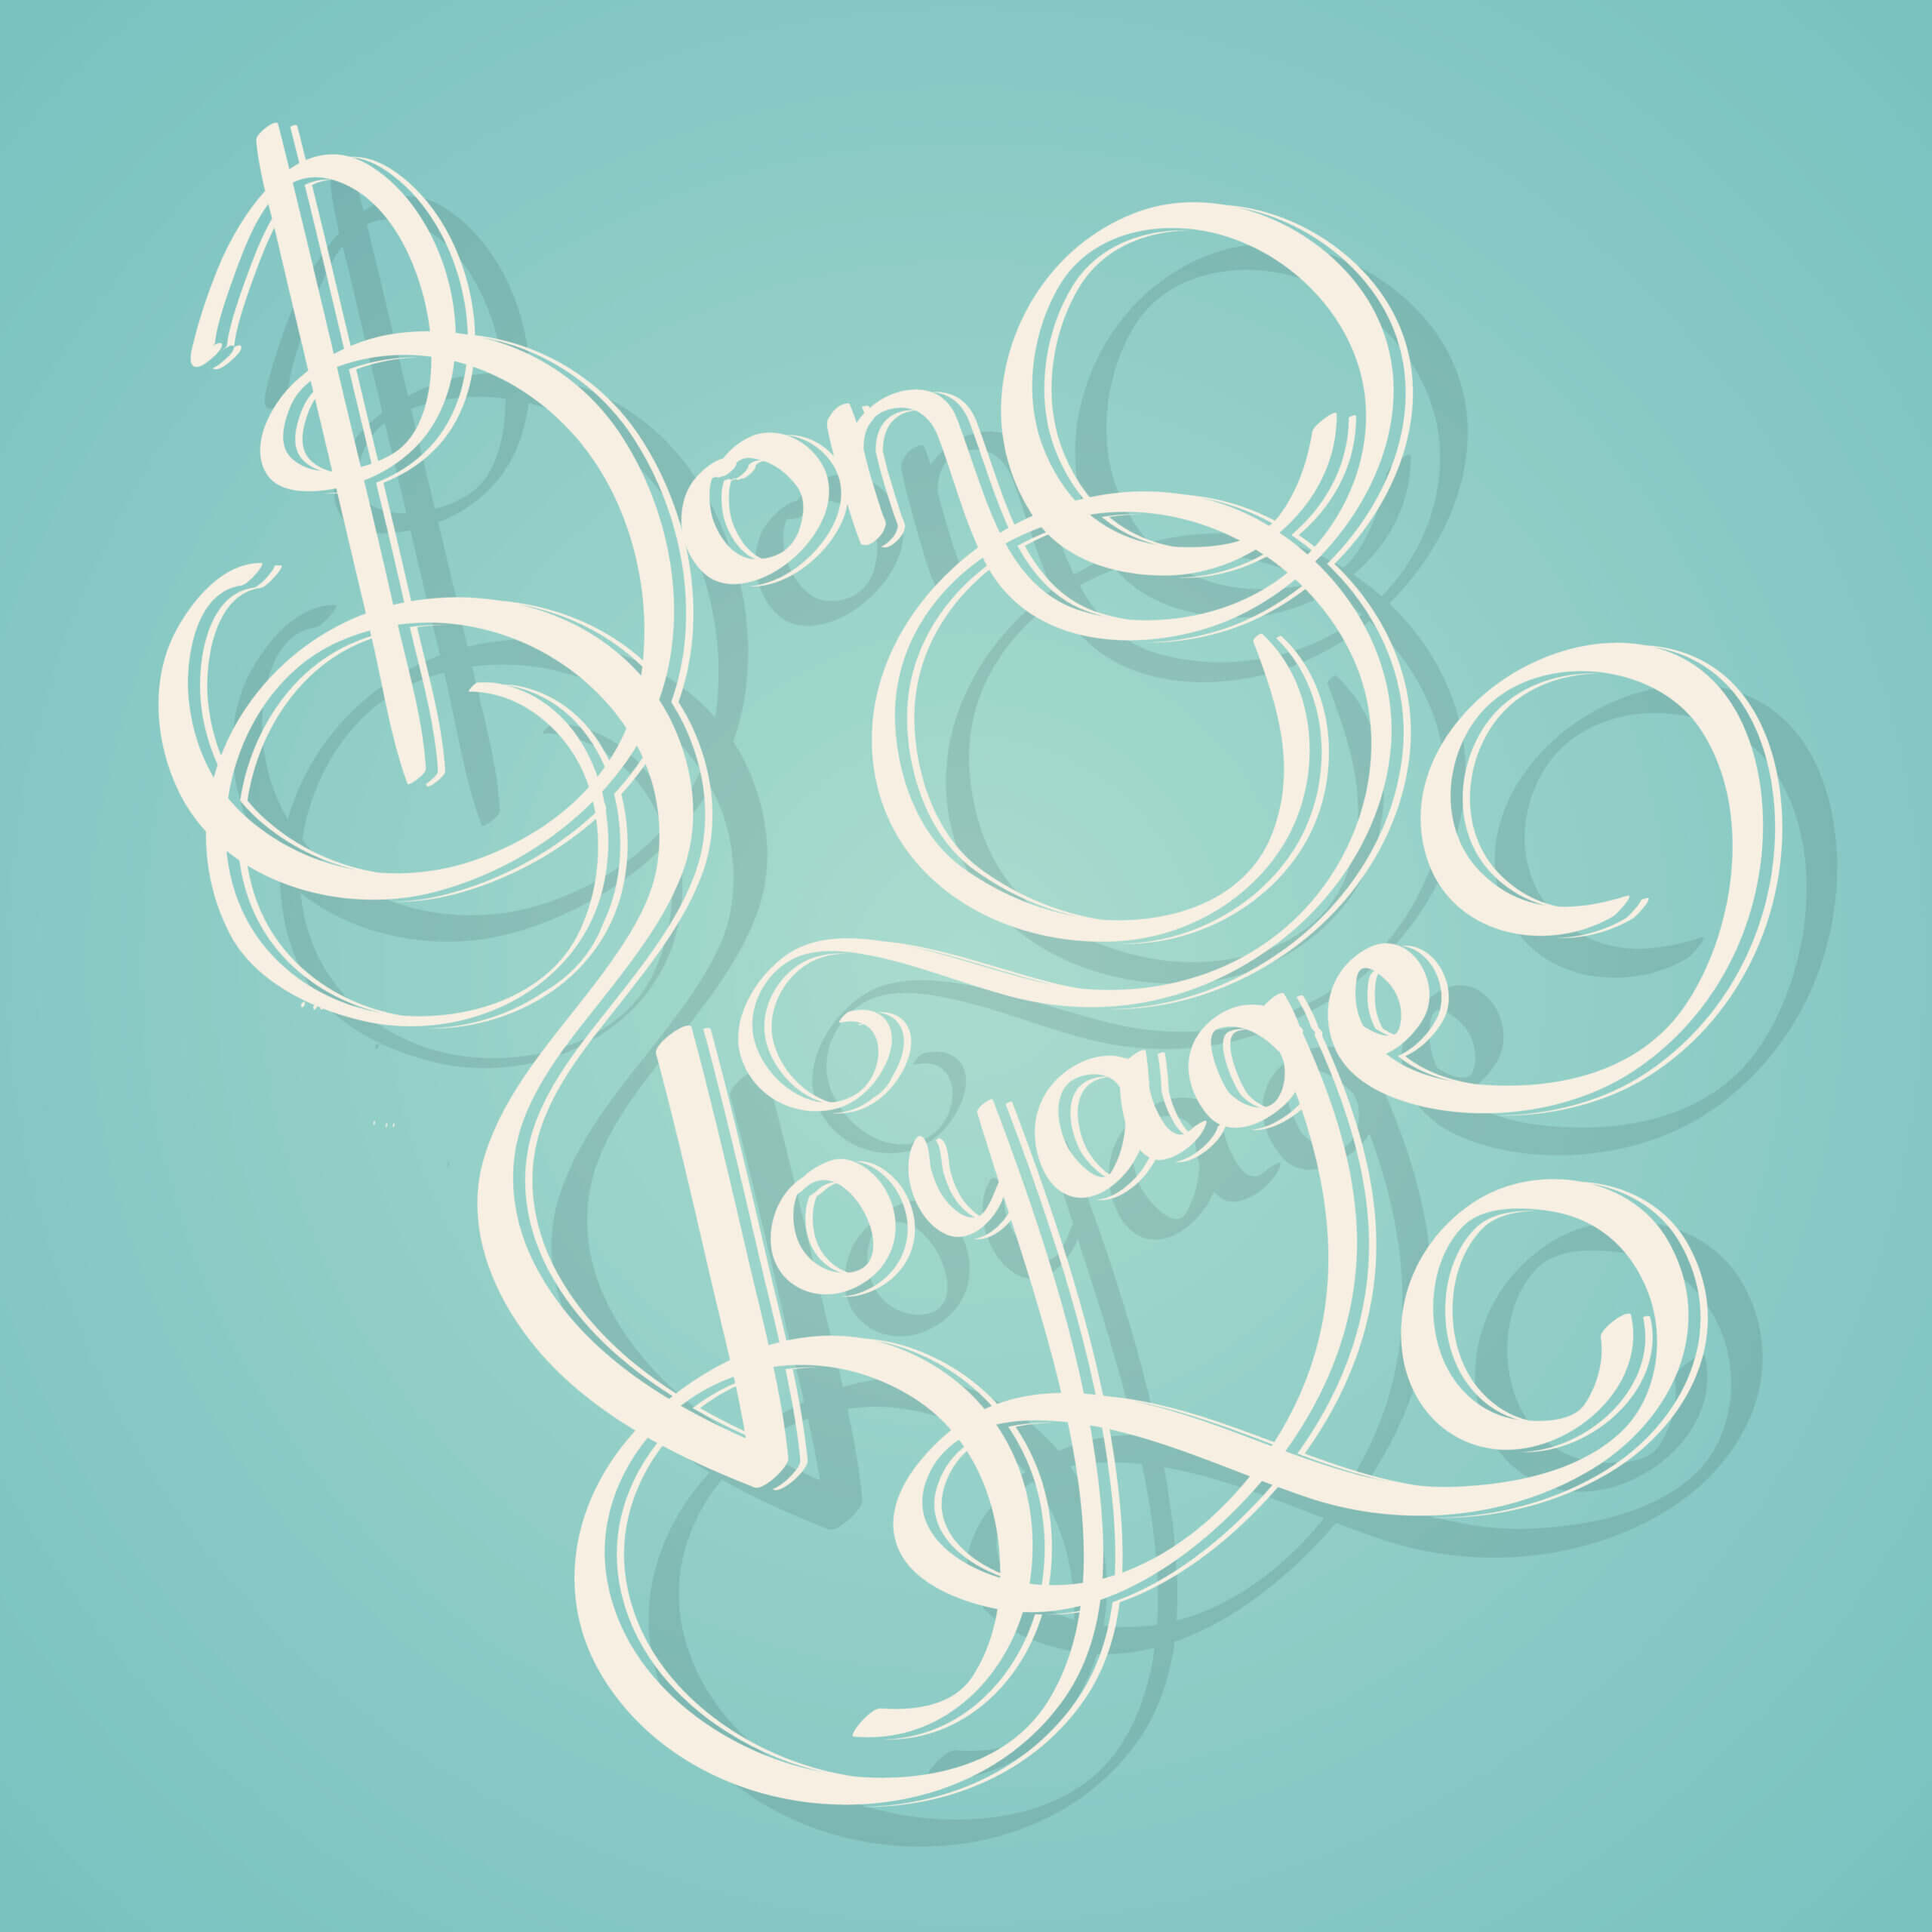 Calligraphy Bon Voyage Text – Download Free Vectors, Clipart Pertaining To Bon Voyage Card Template